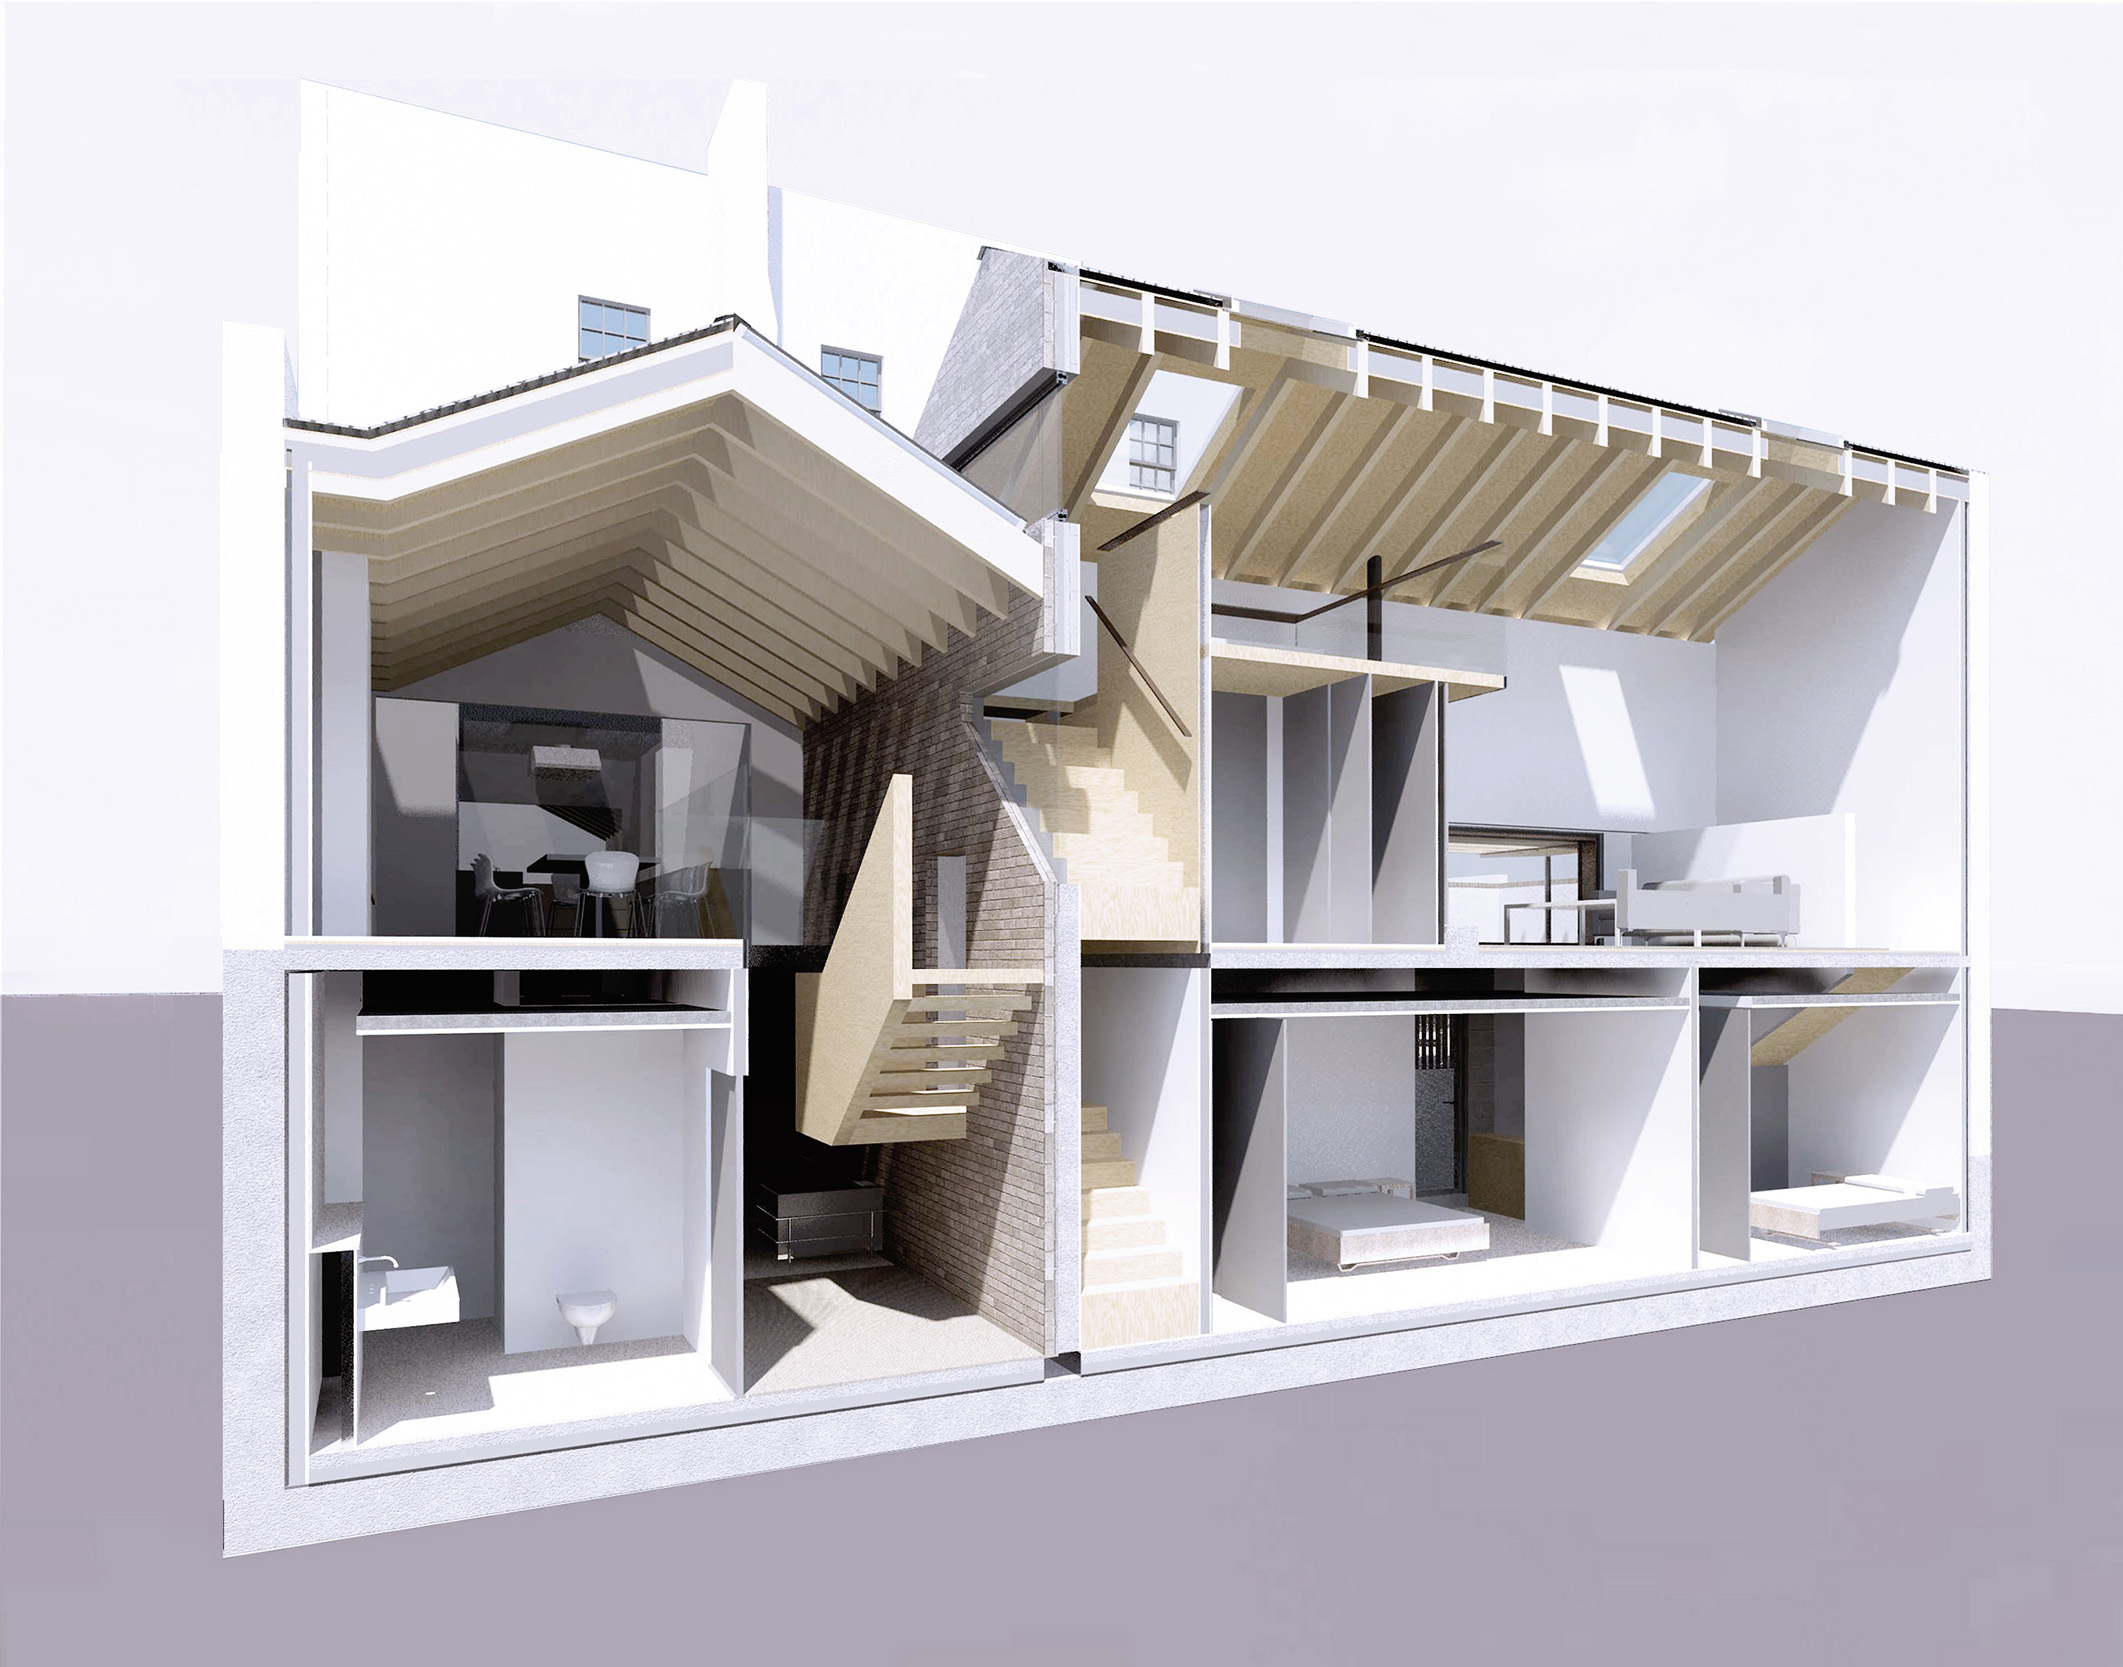 Hidden House Chelsea Knightsbridge LTS Architects sectional perspective